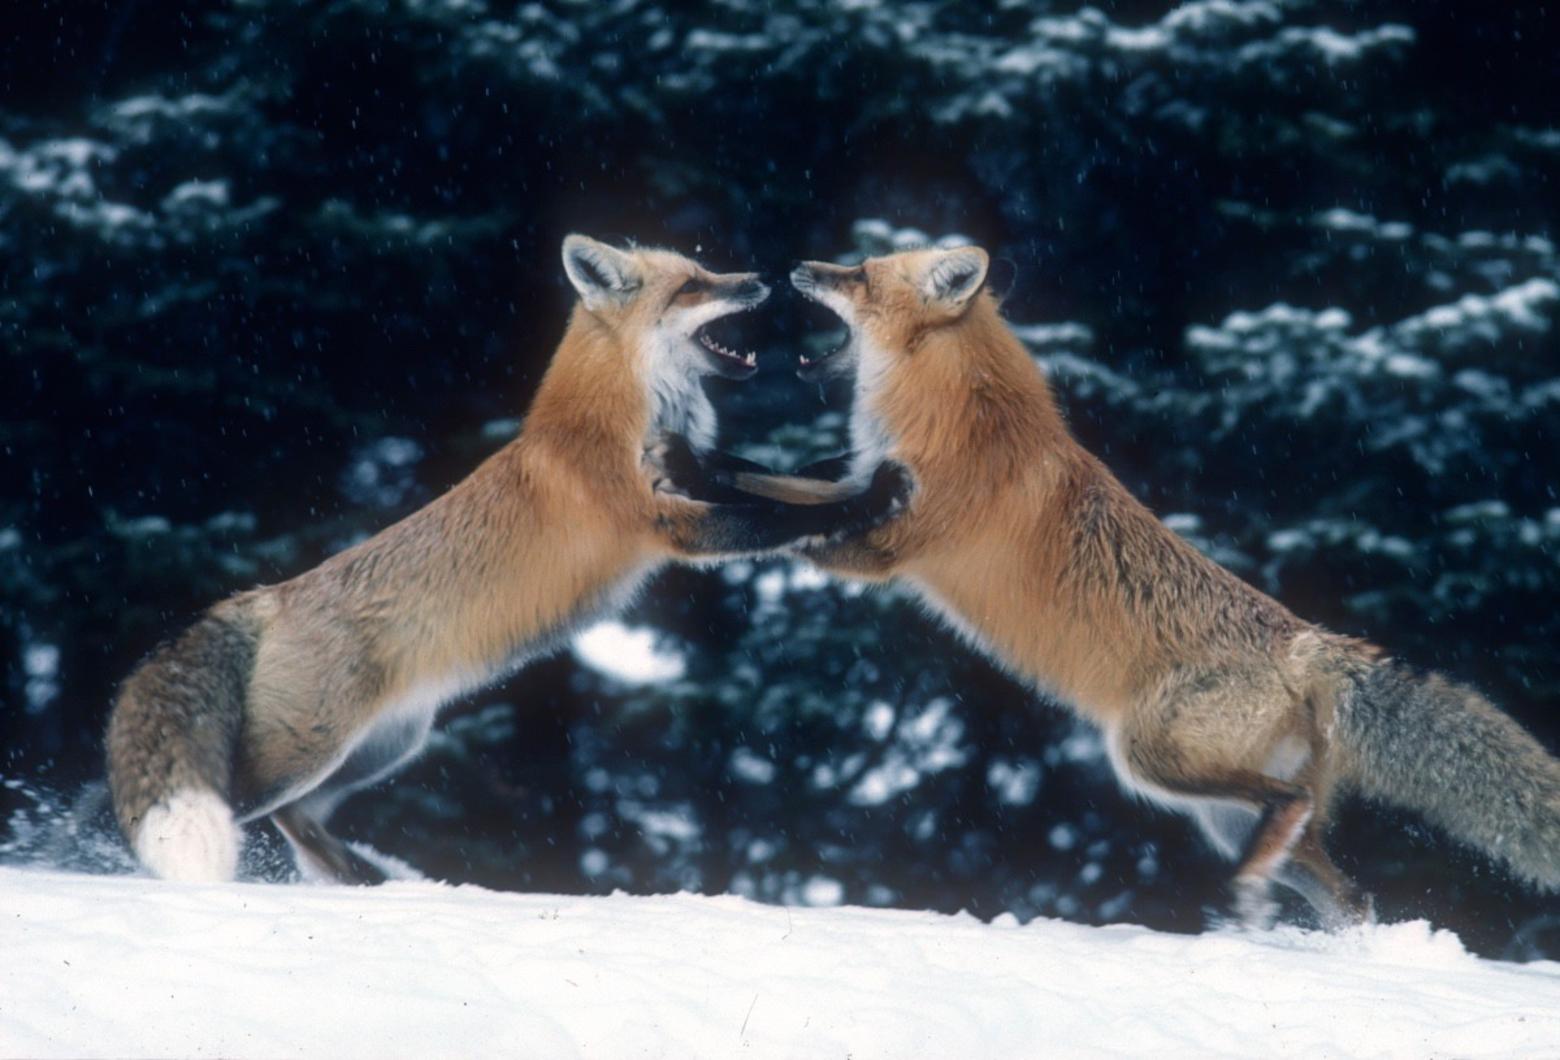 Fuller's photo, "Dancing Foxes," which won him an award.